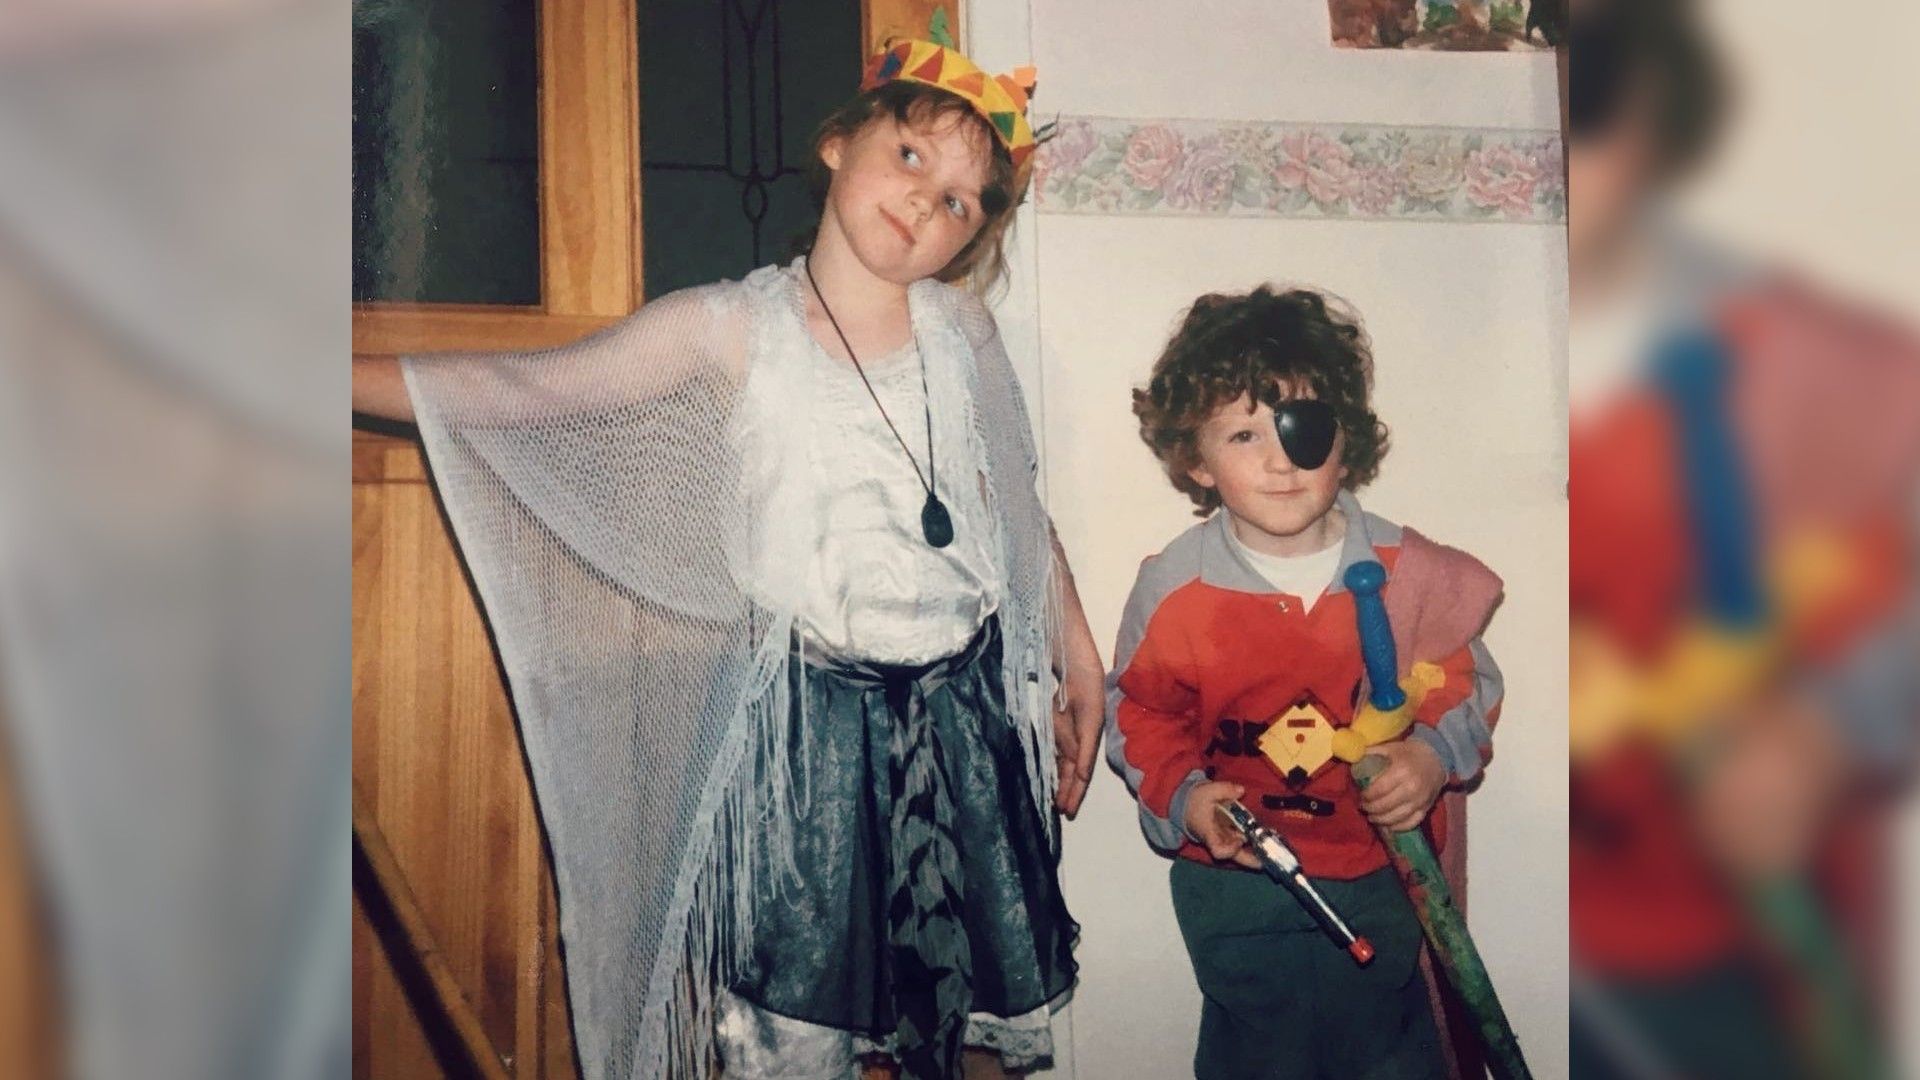  Evanna Lynch with her younger brother